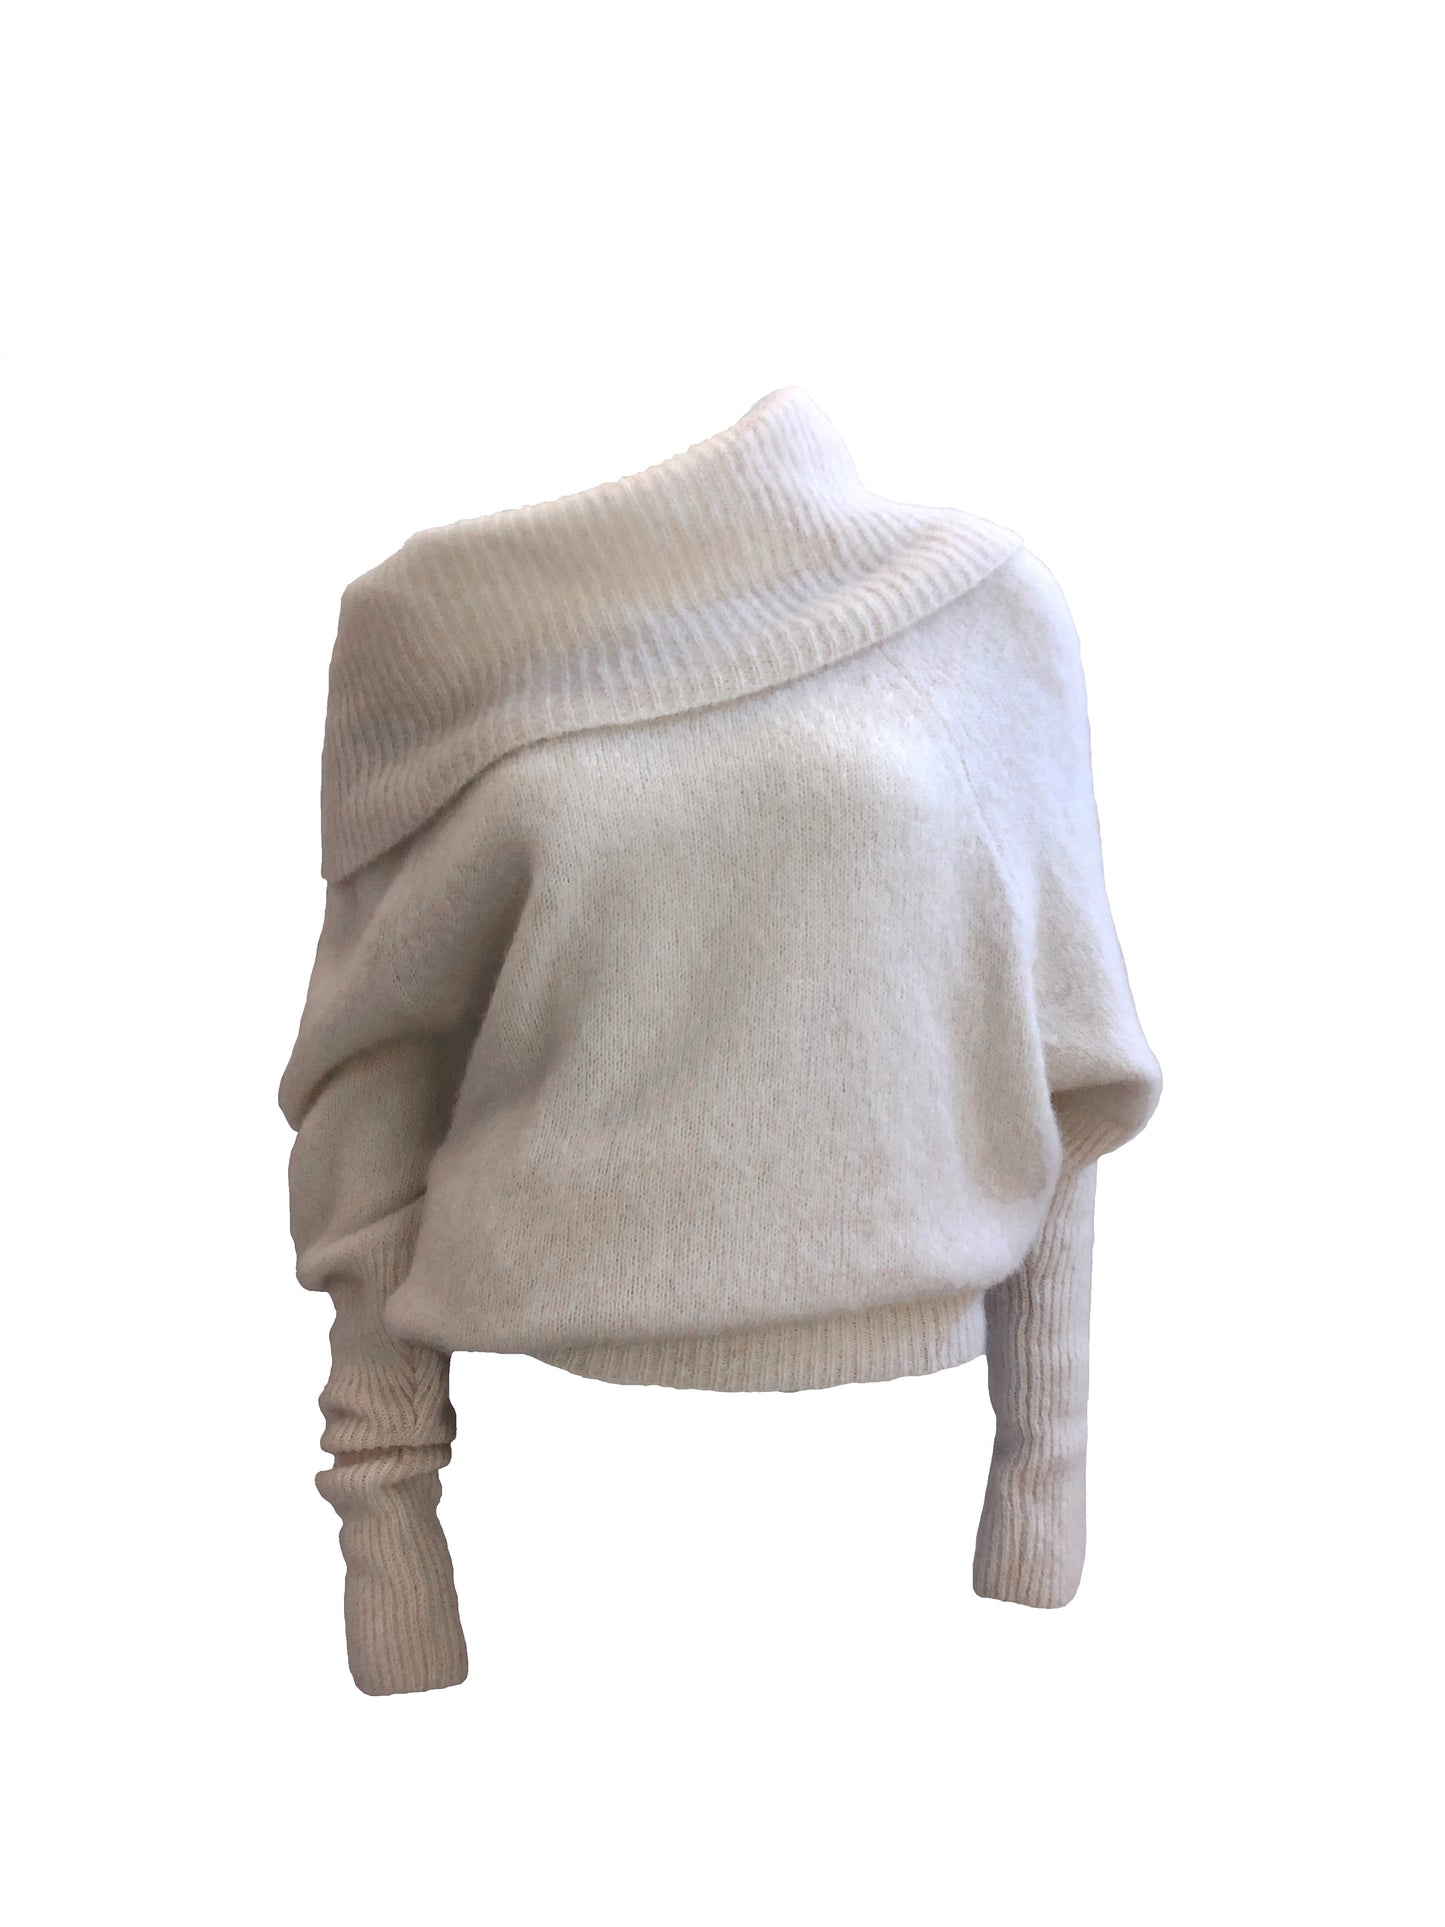 The Moss Sky Sweater in White